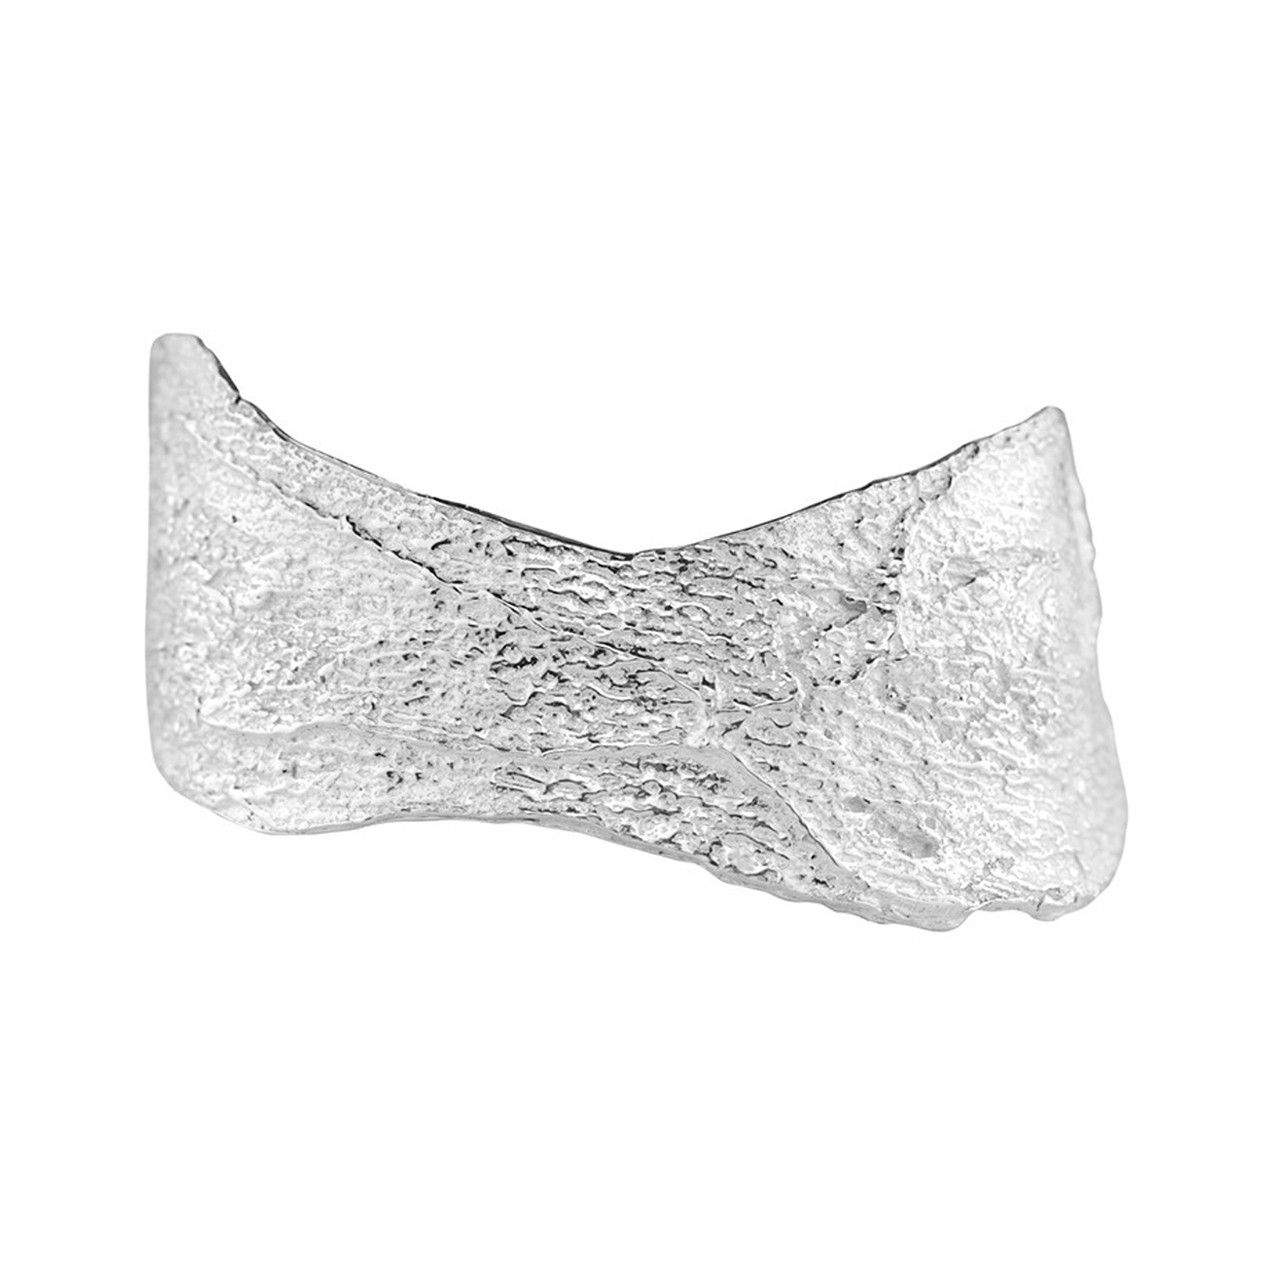 Issy White: London Plane Cuff in Silver, tomfoolery